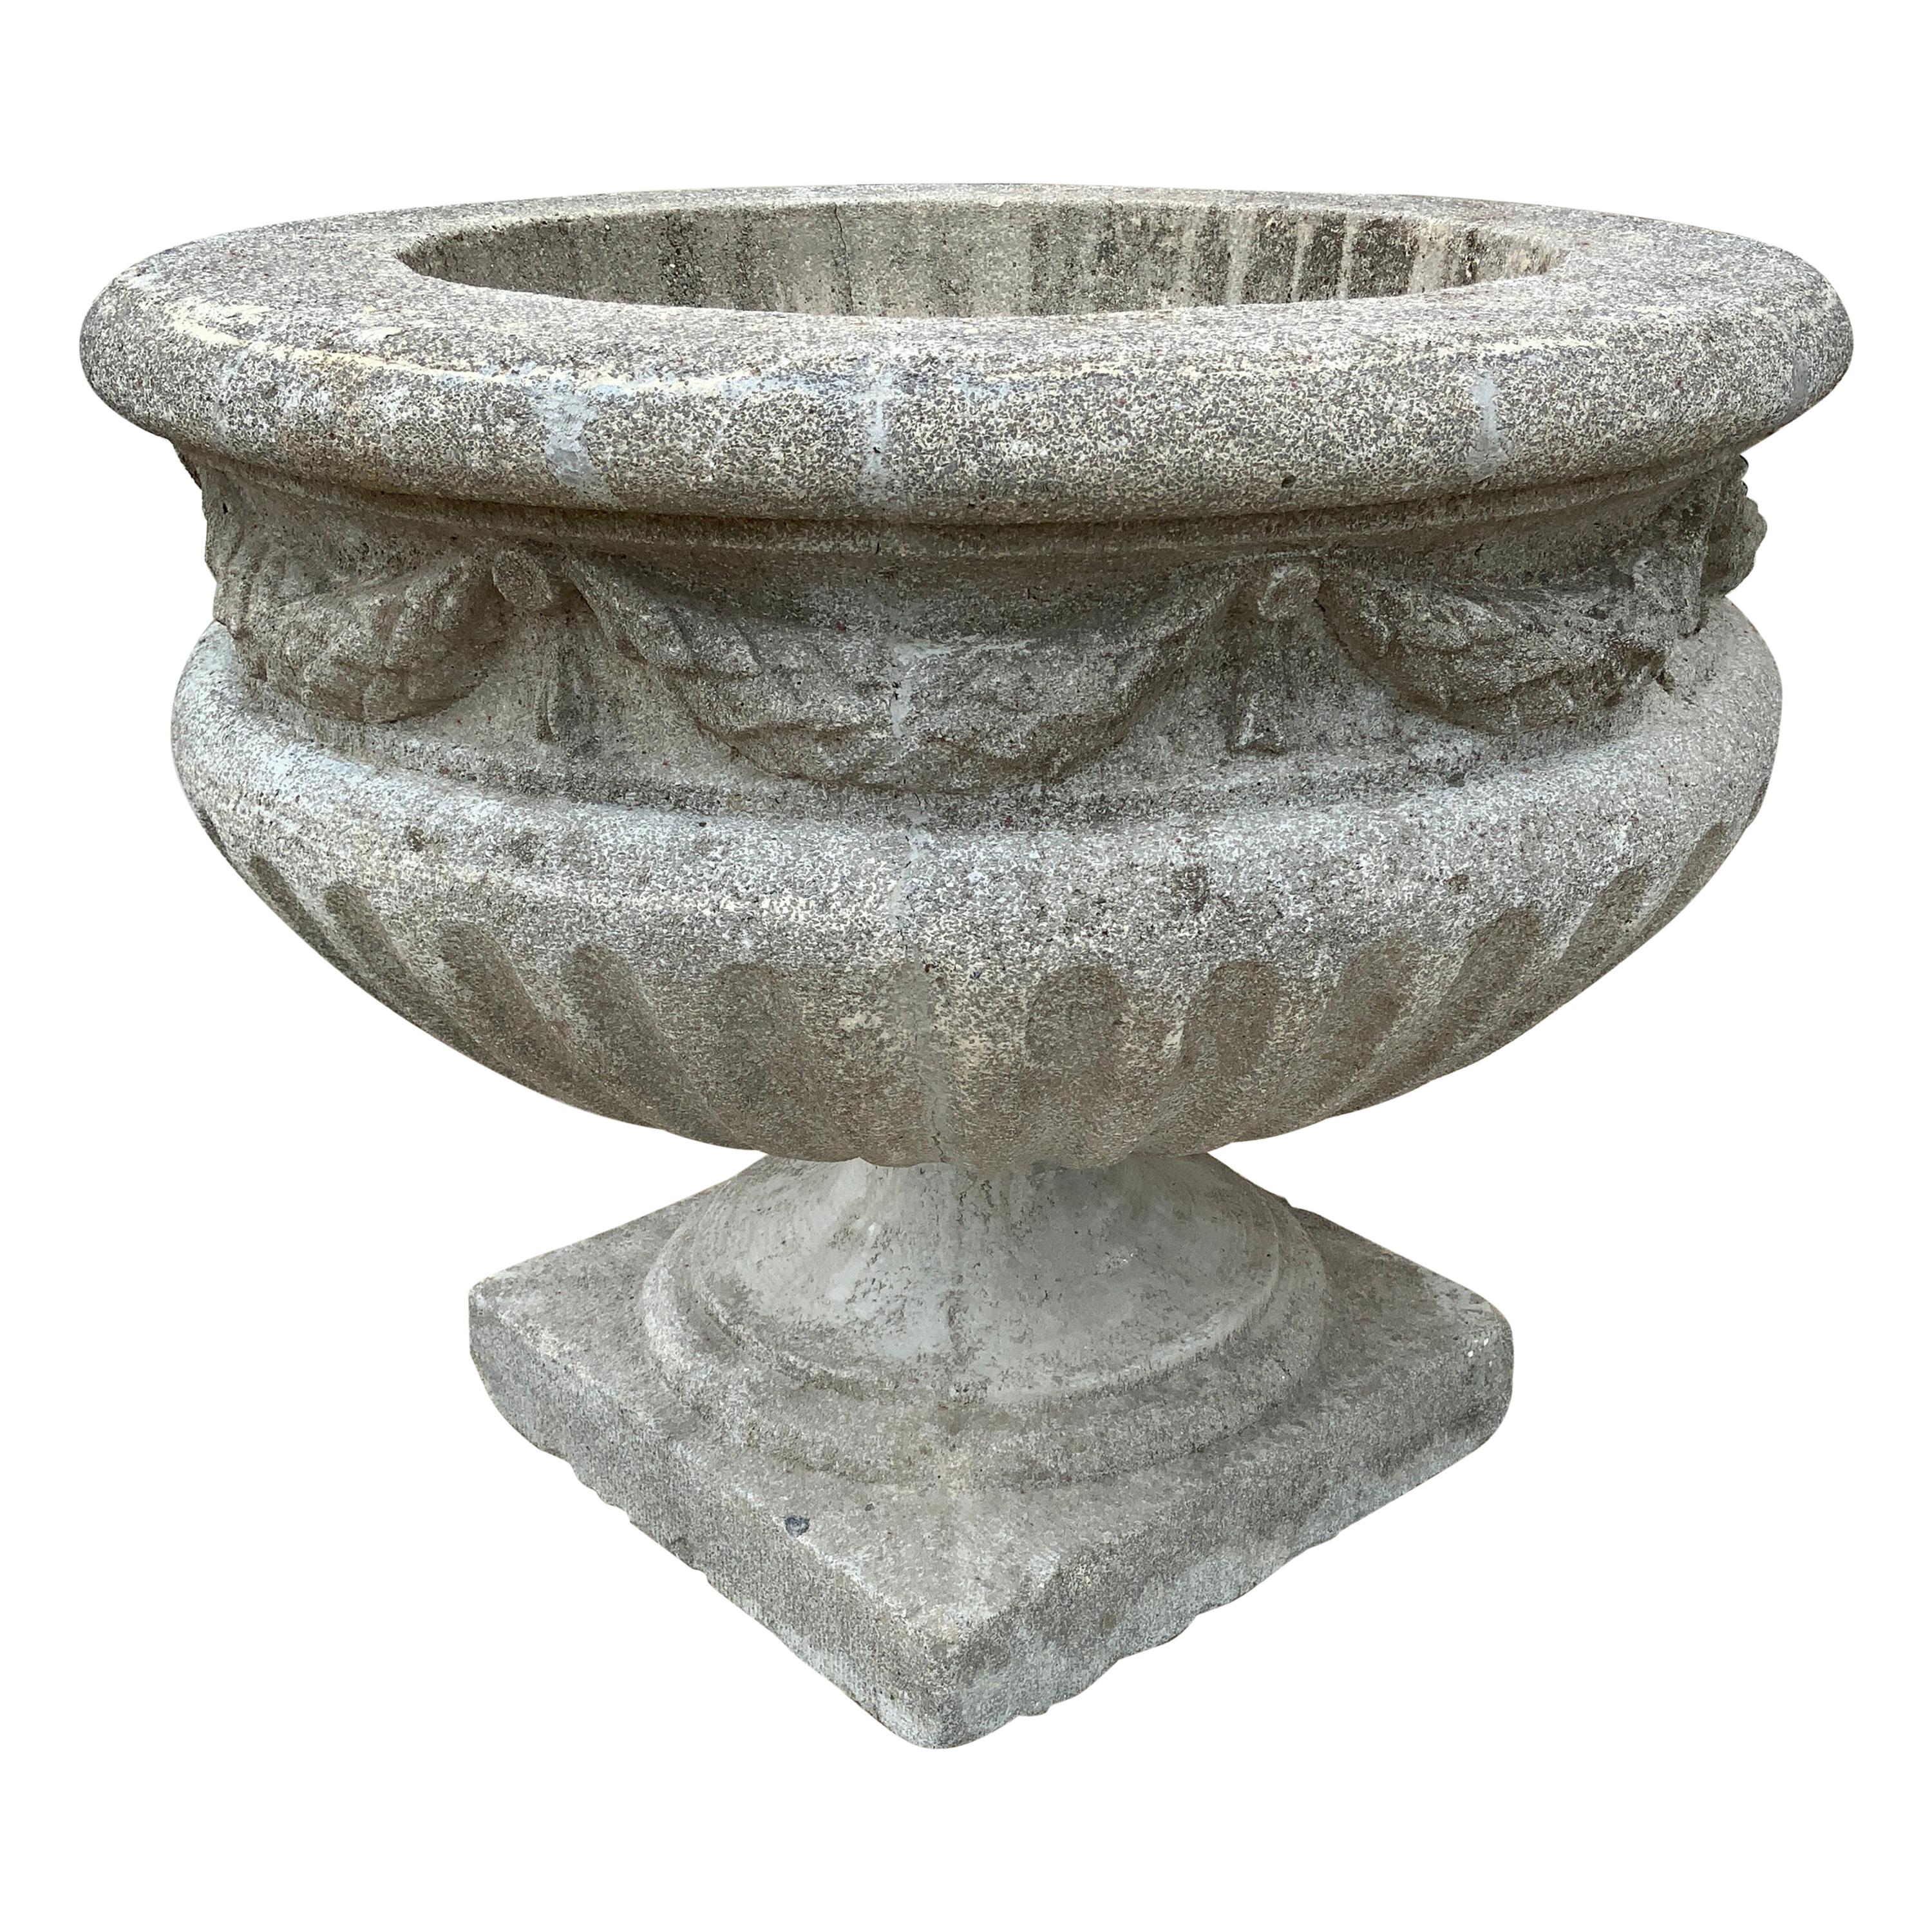 Early 20th Century Limestone Composite Planter from France